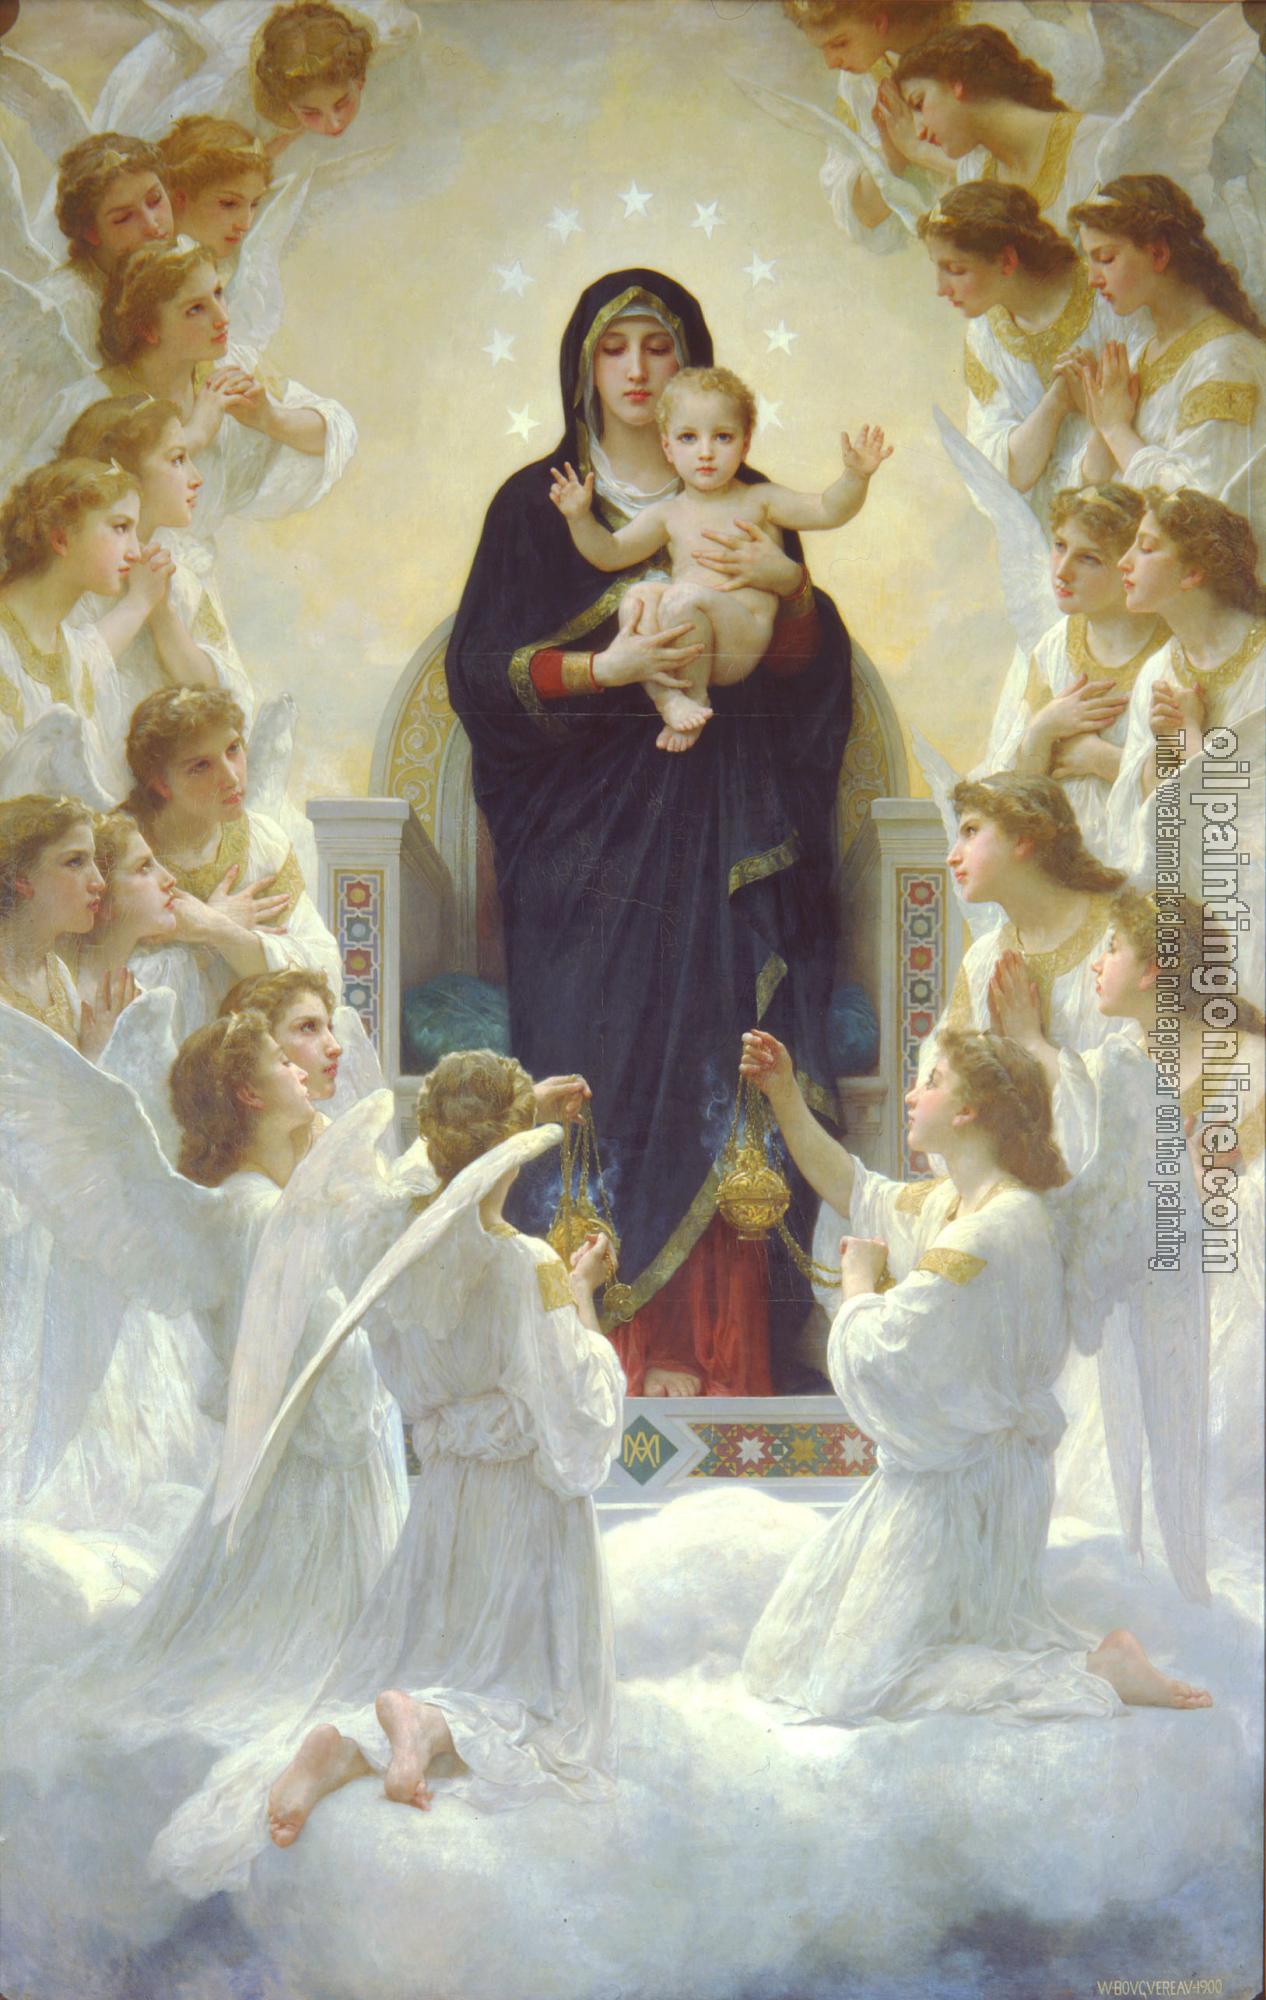 Bouguereau, William-Adolphe - The Virgin with Angels